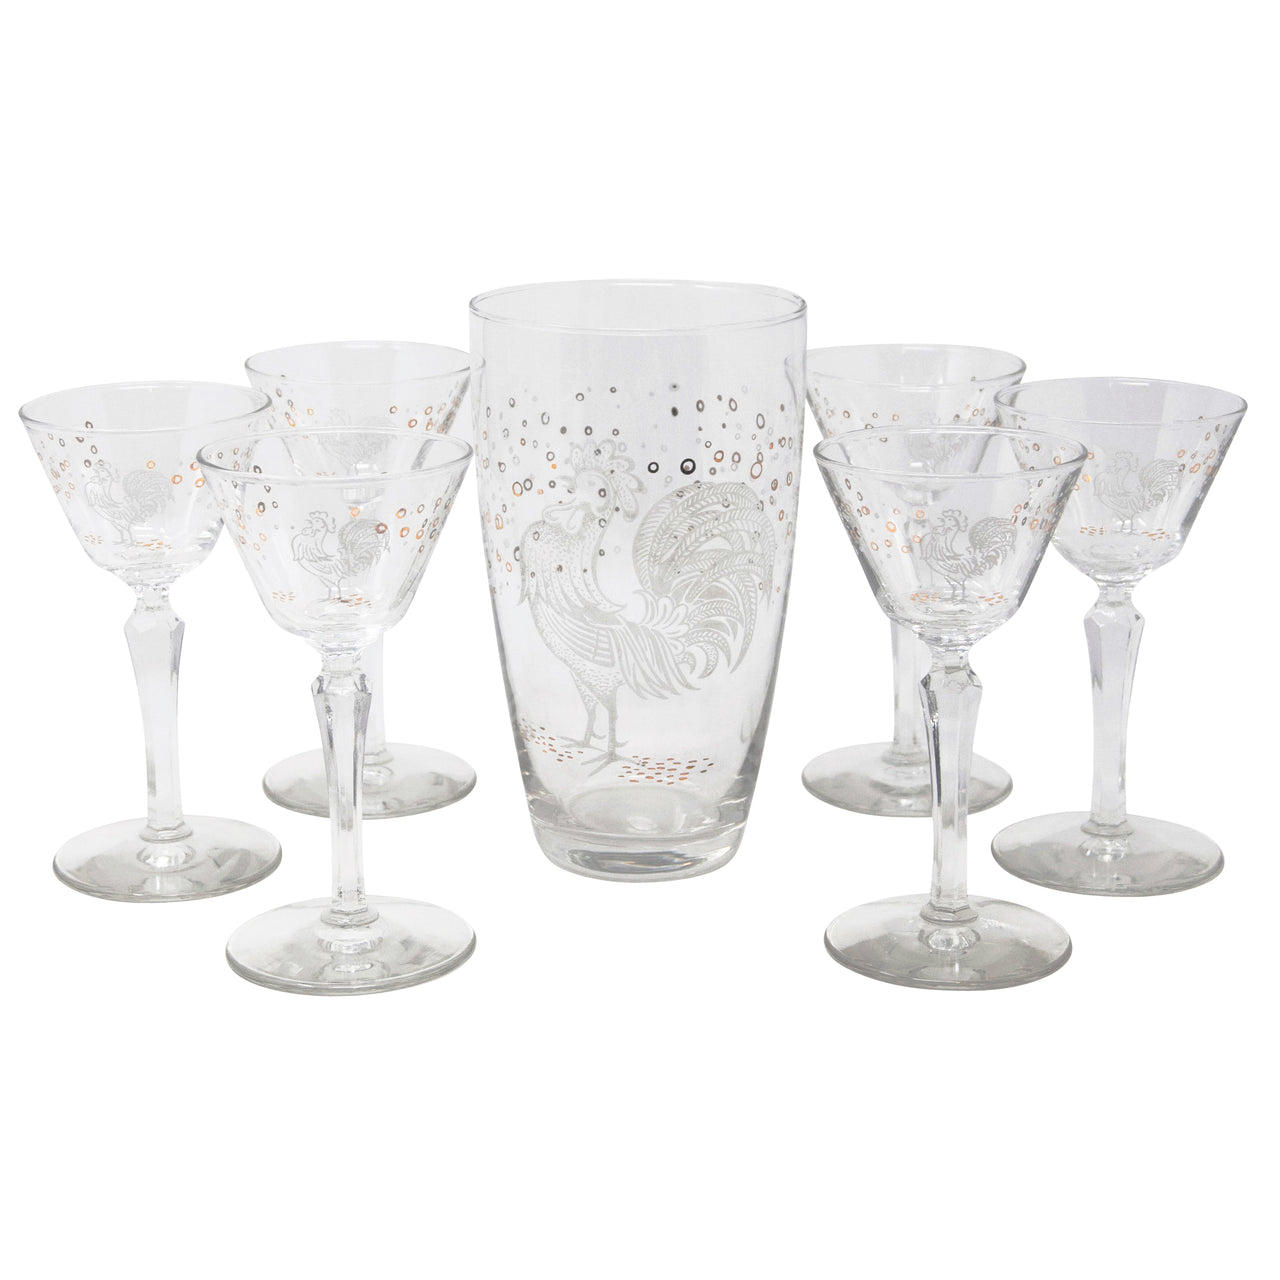 Vintage Mid Century White Rooster Mixing Glass Cocktail Set | The Hour